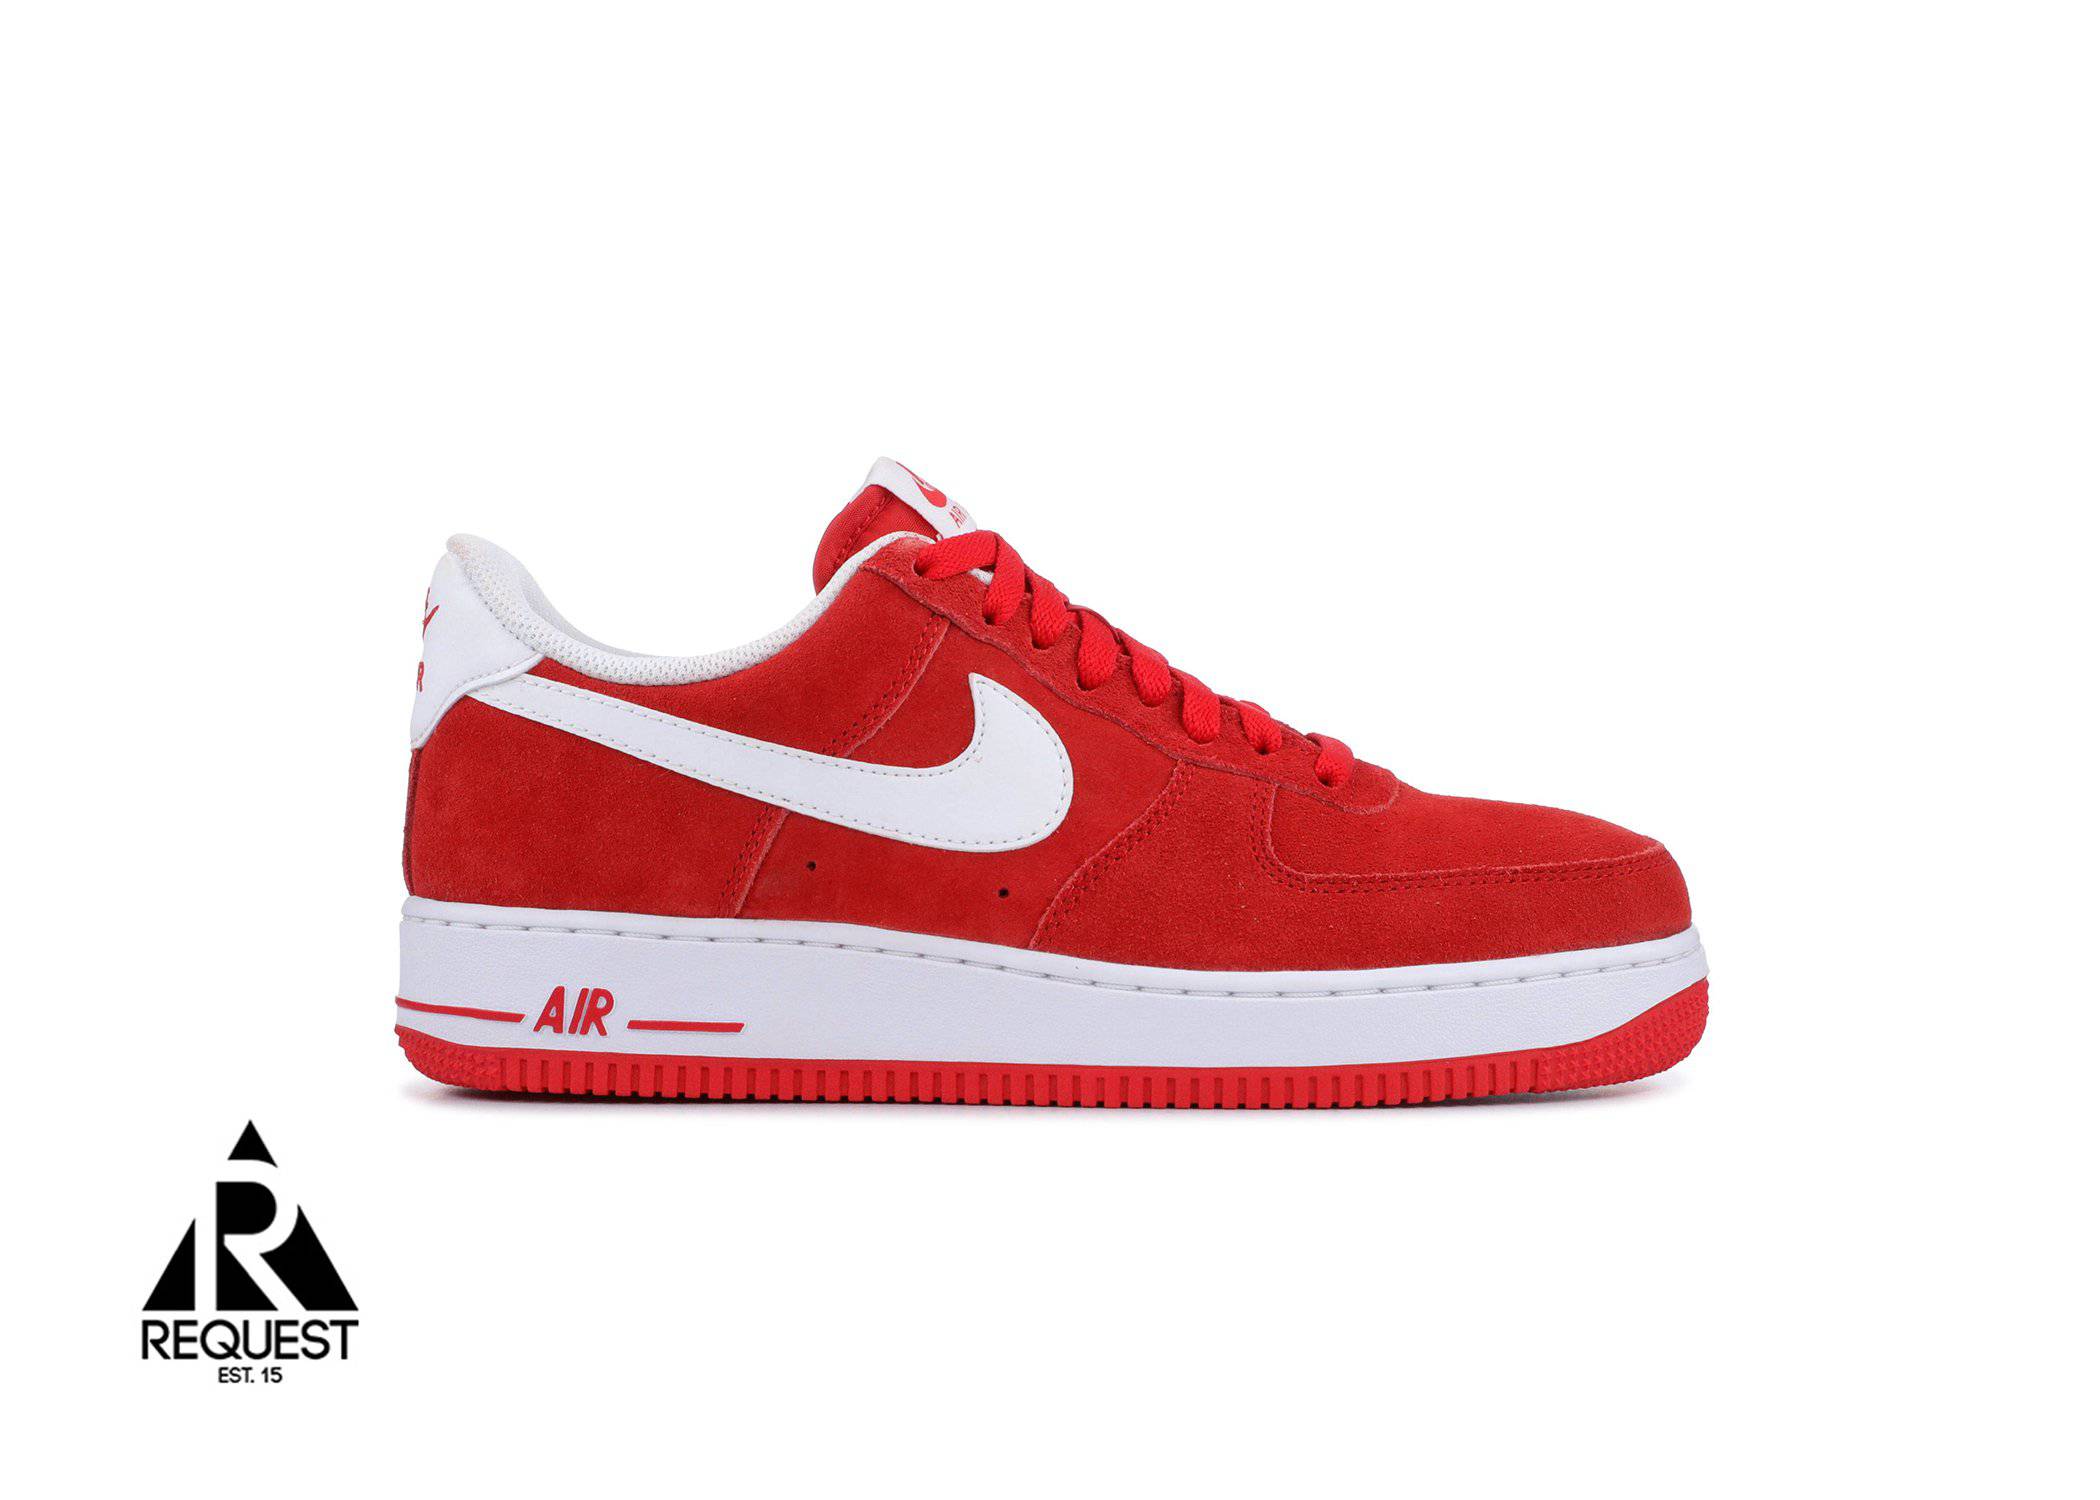 Air Force 1 “University Red”